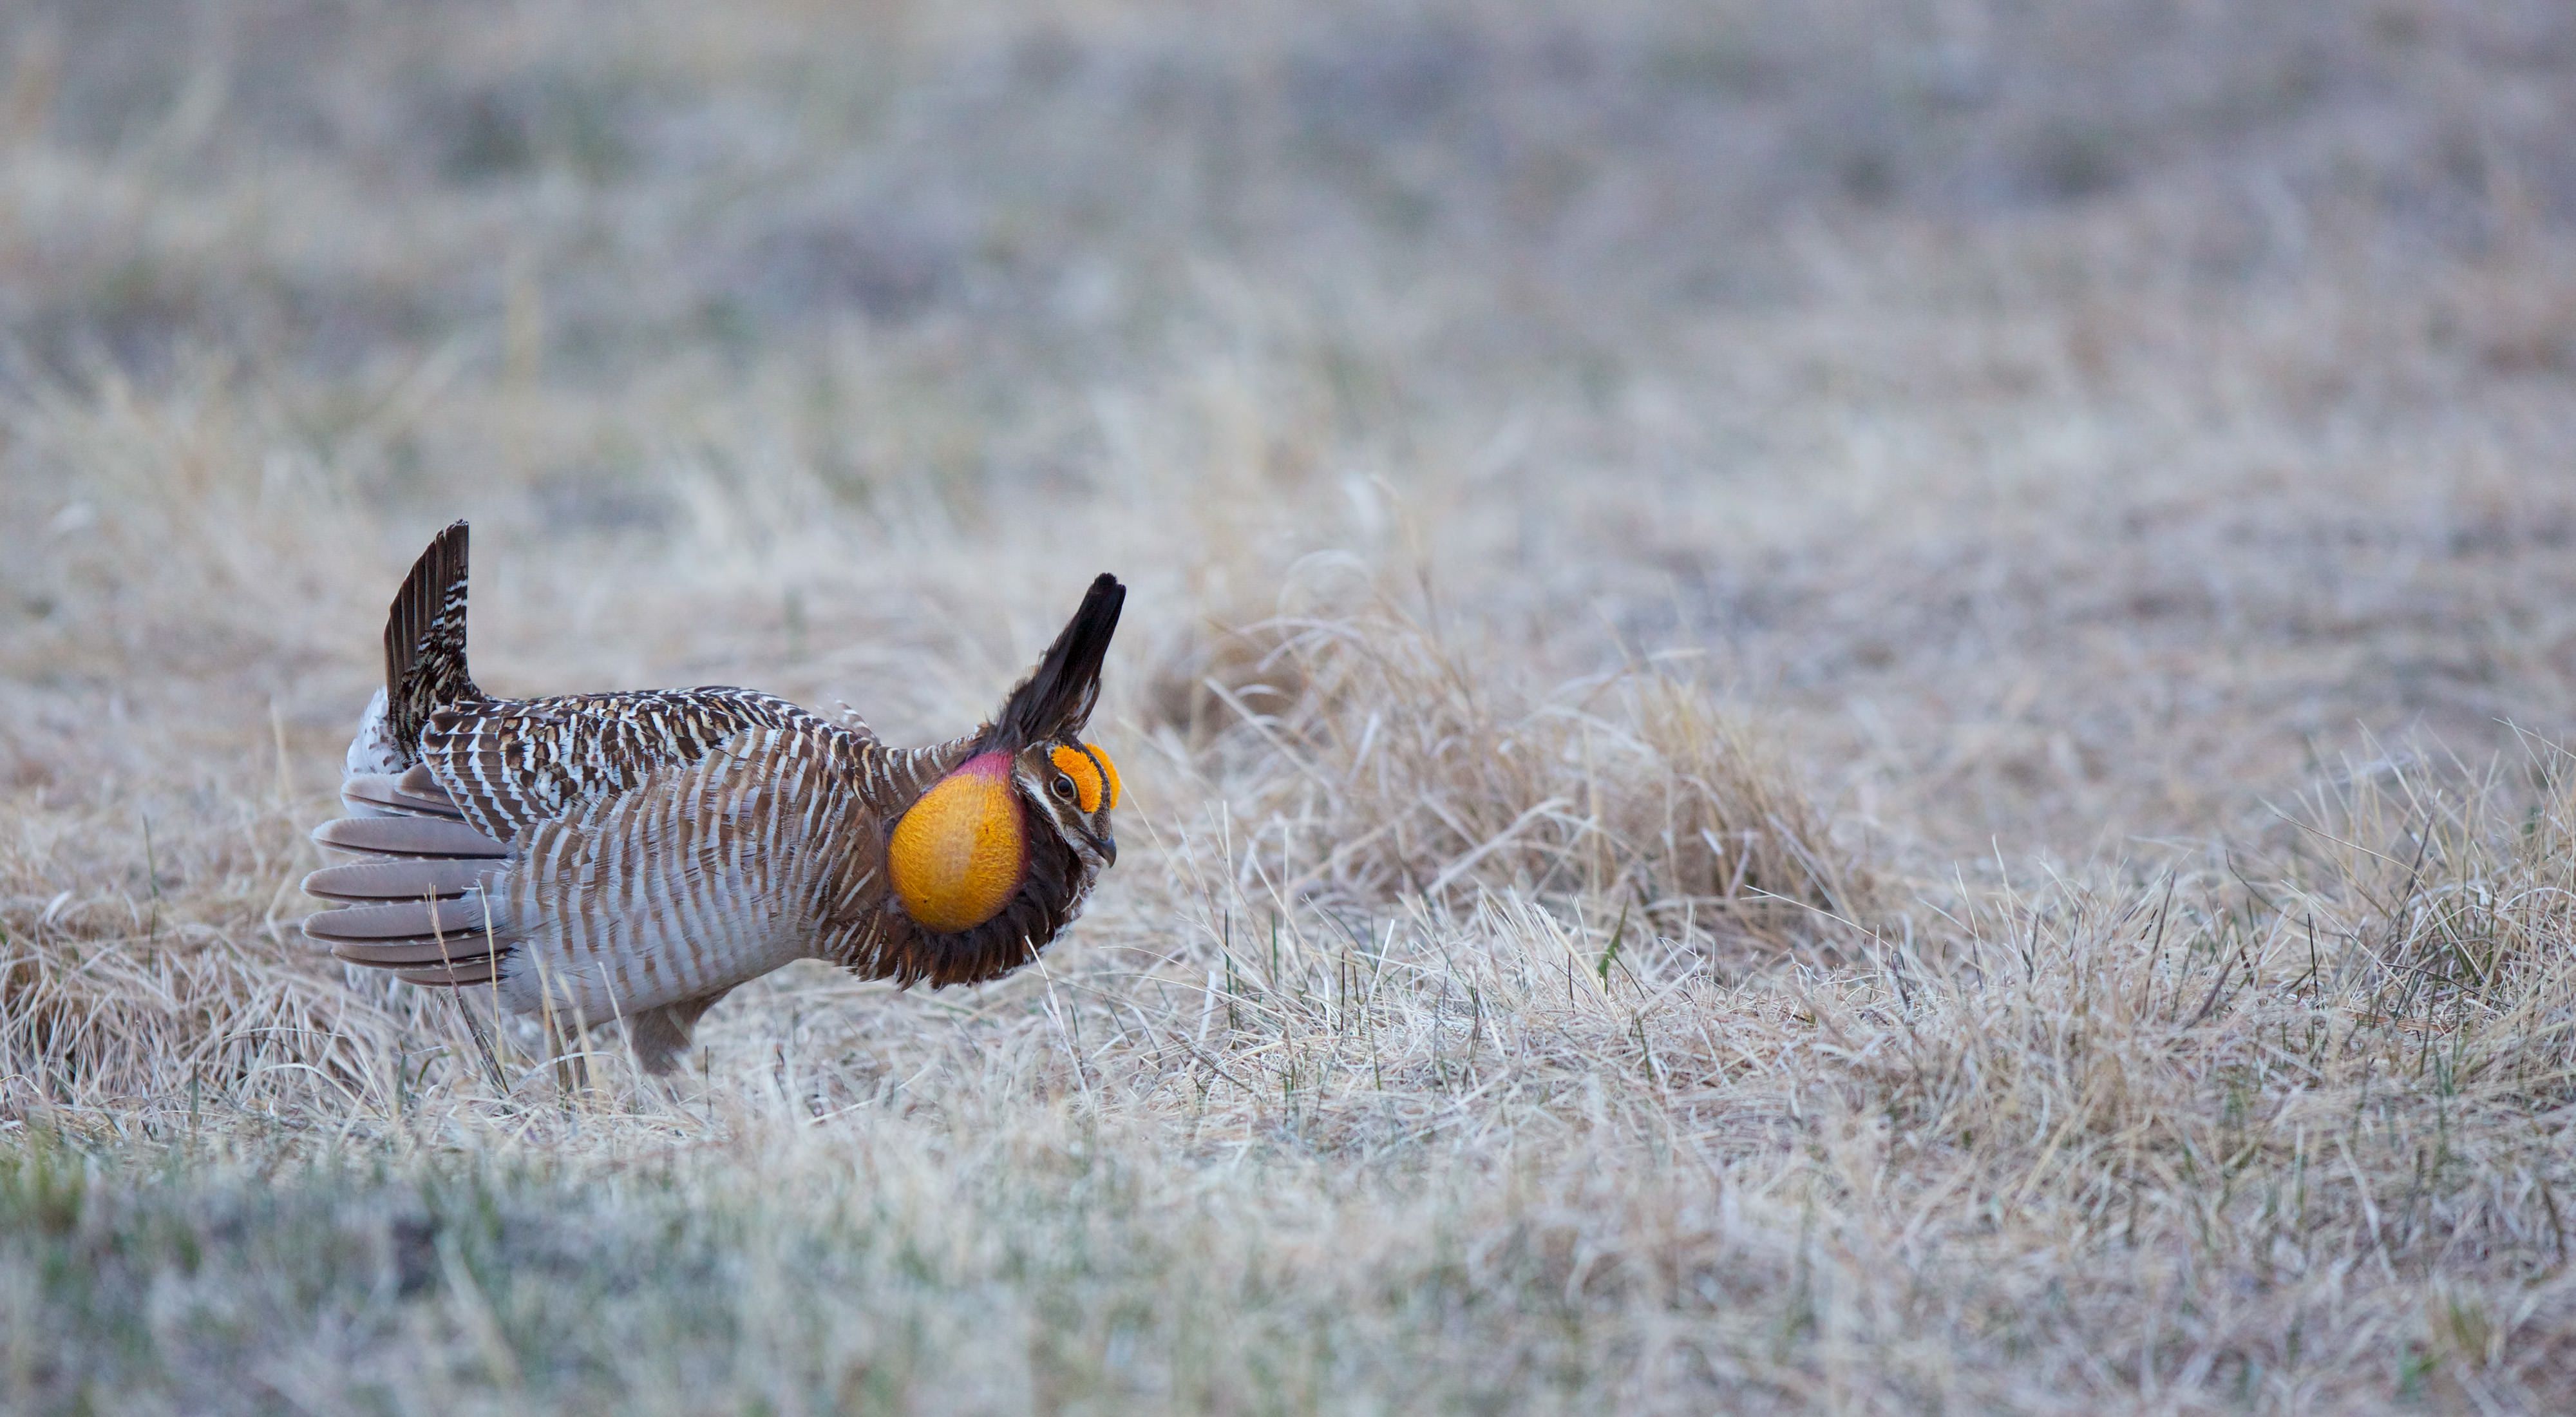 A male greater prairie chicken with yellow eyebrows and an inflated air sac stands in dry grass in a mating display.